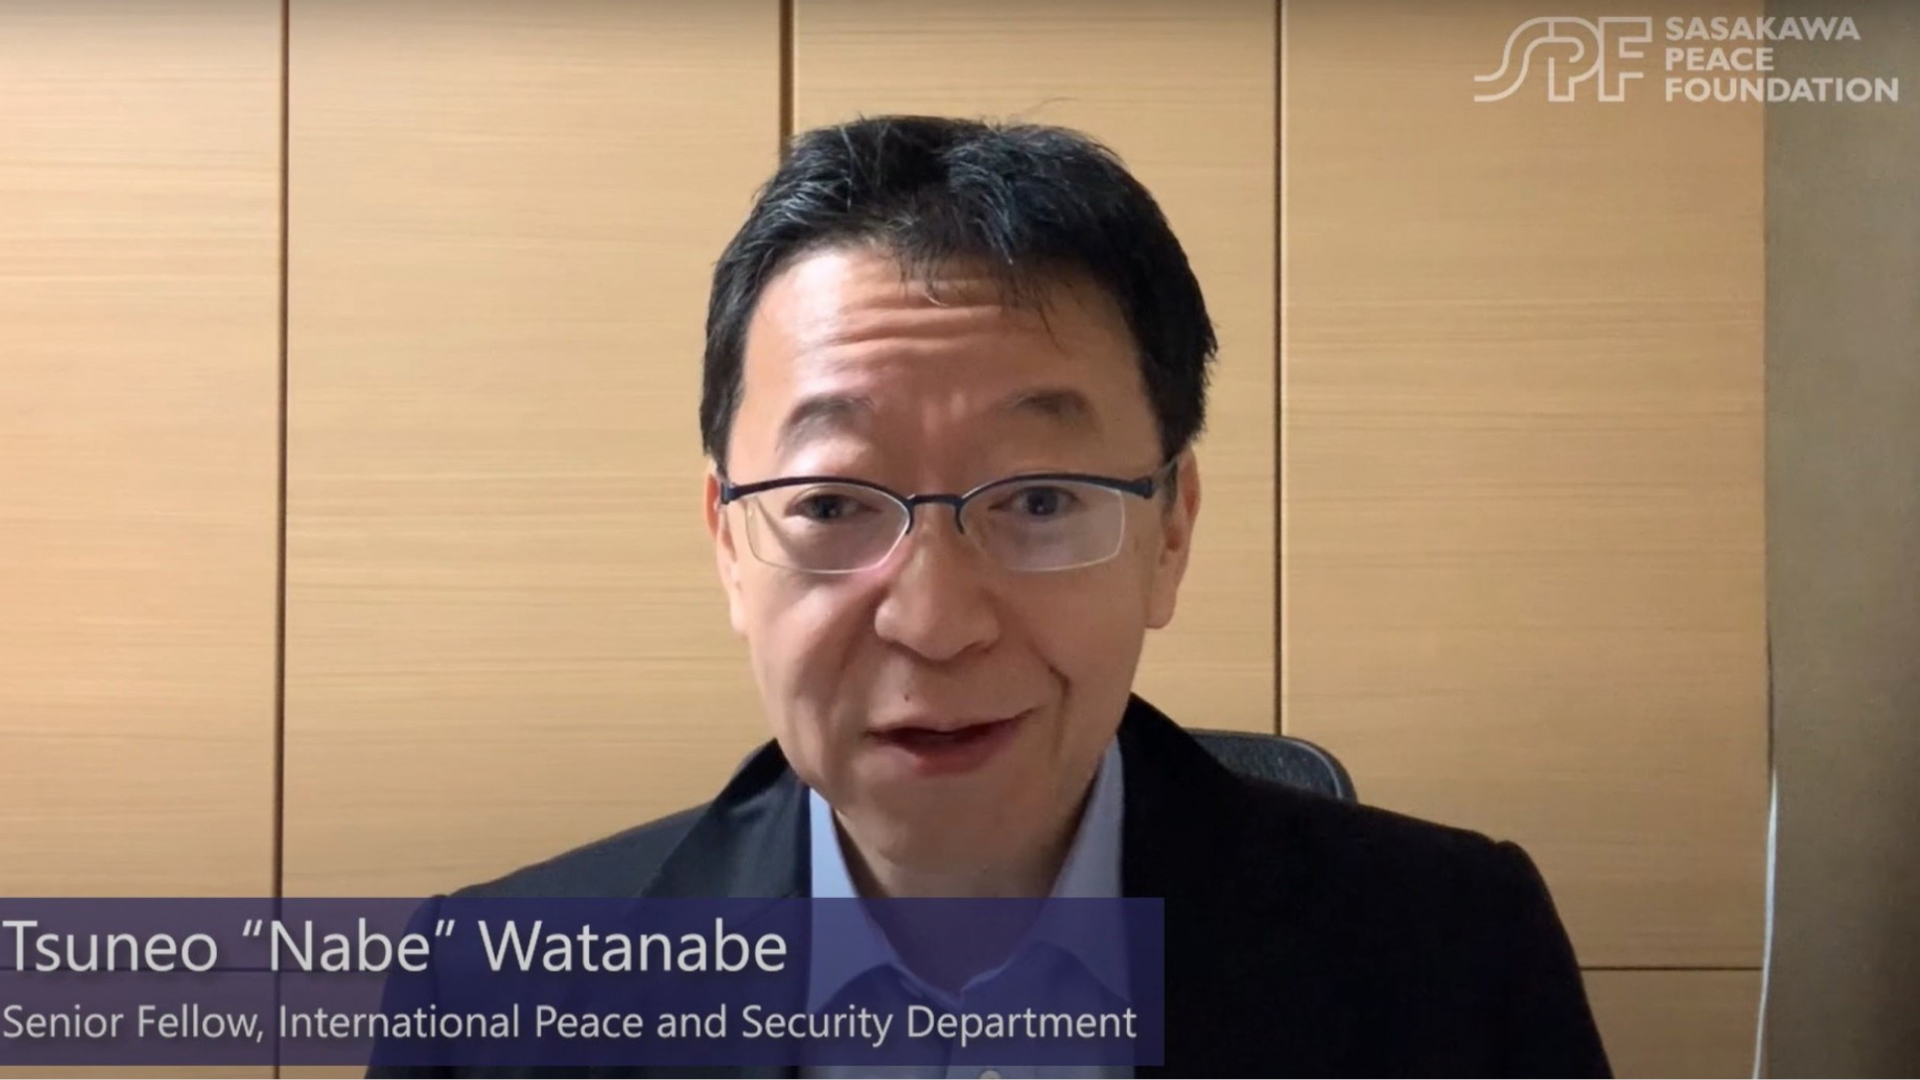 How is Japan Responding to COVID-19? Interview with SPF Senior Fellow Tsuneo "Nabe" Watanabe